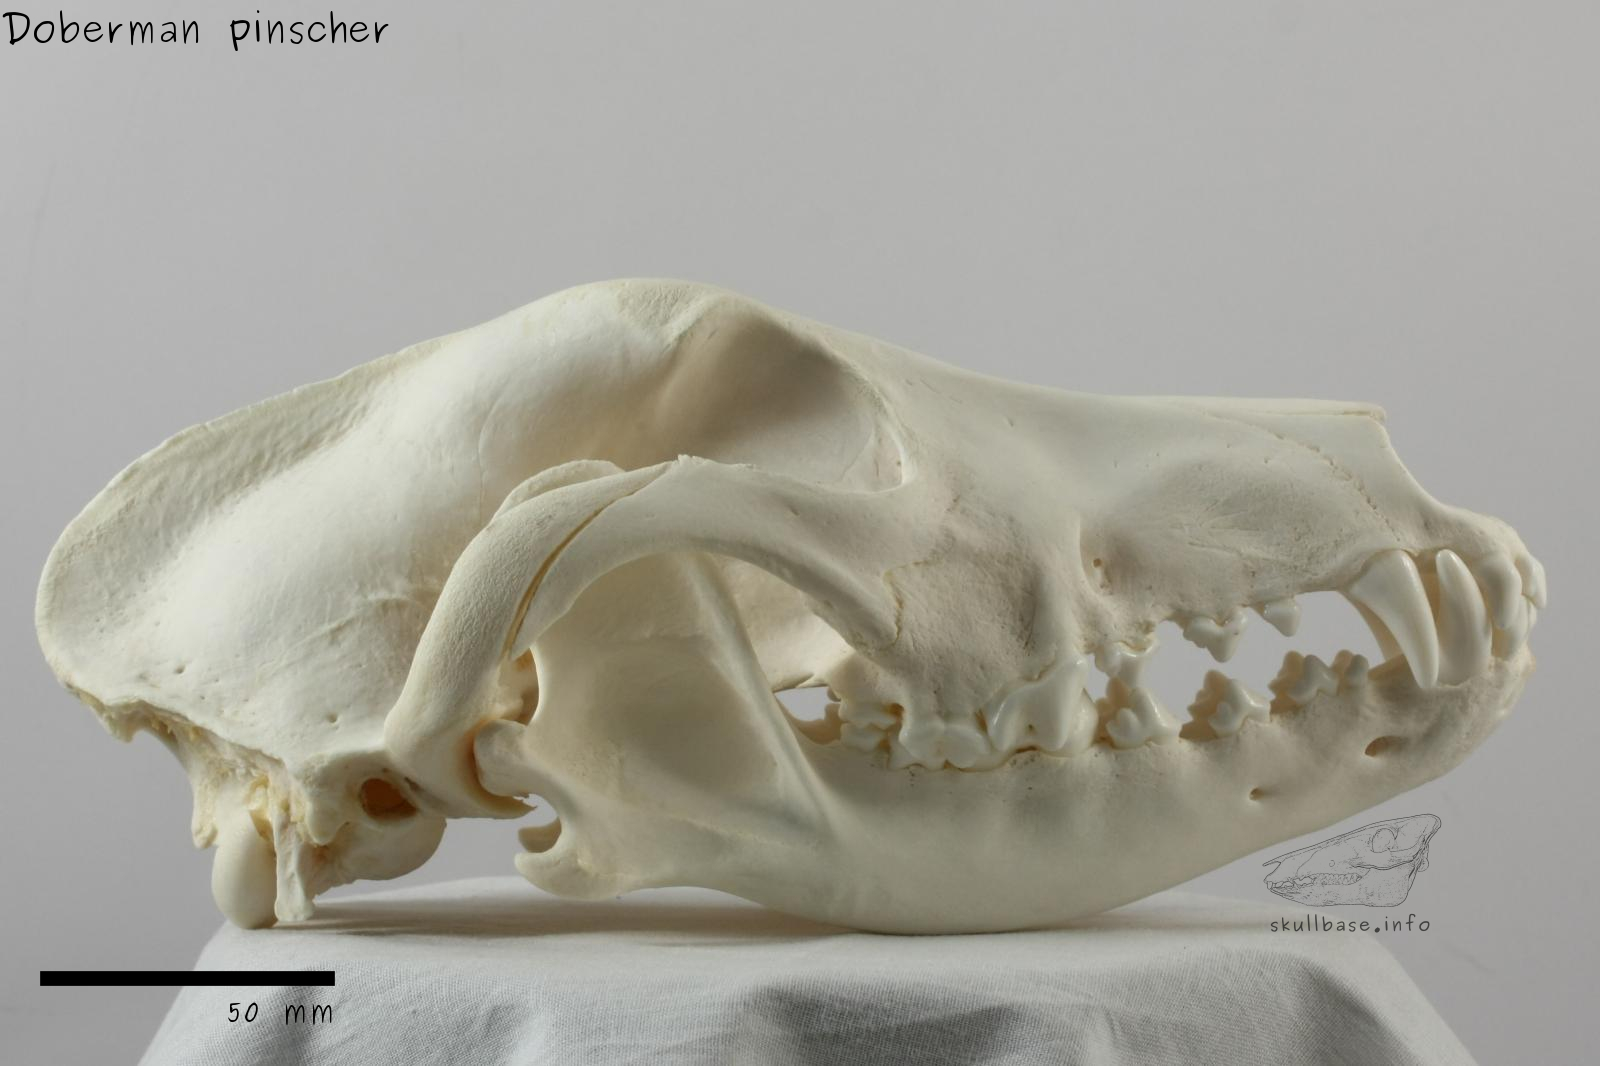 Doberman pinscher (Canis lupus familiaris) skull lateral view